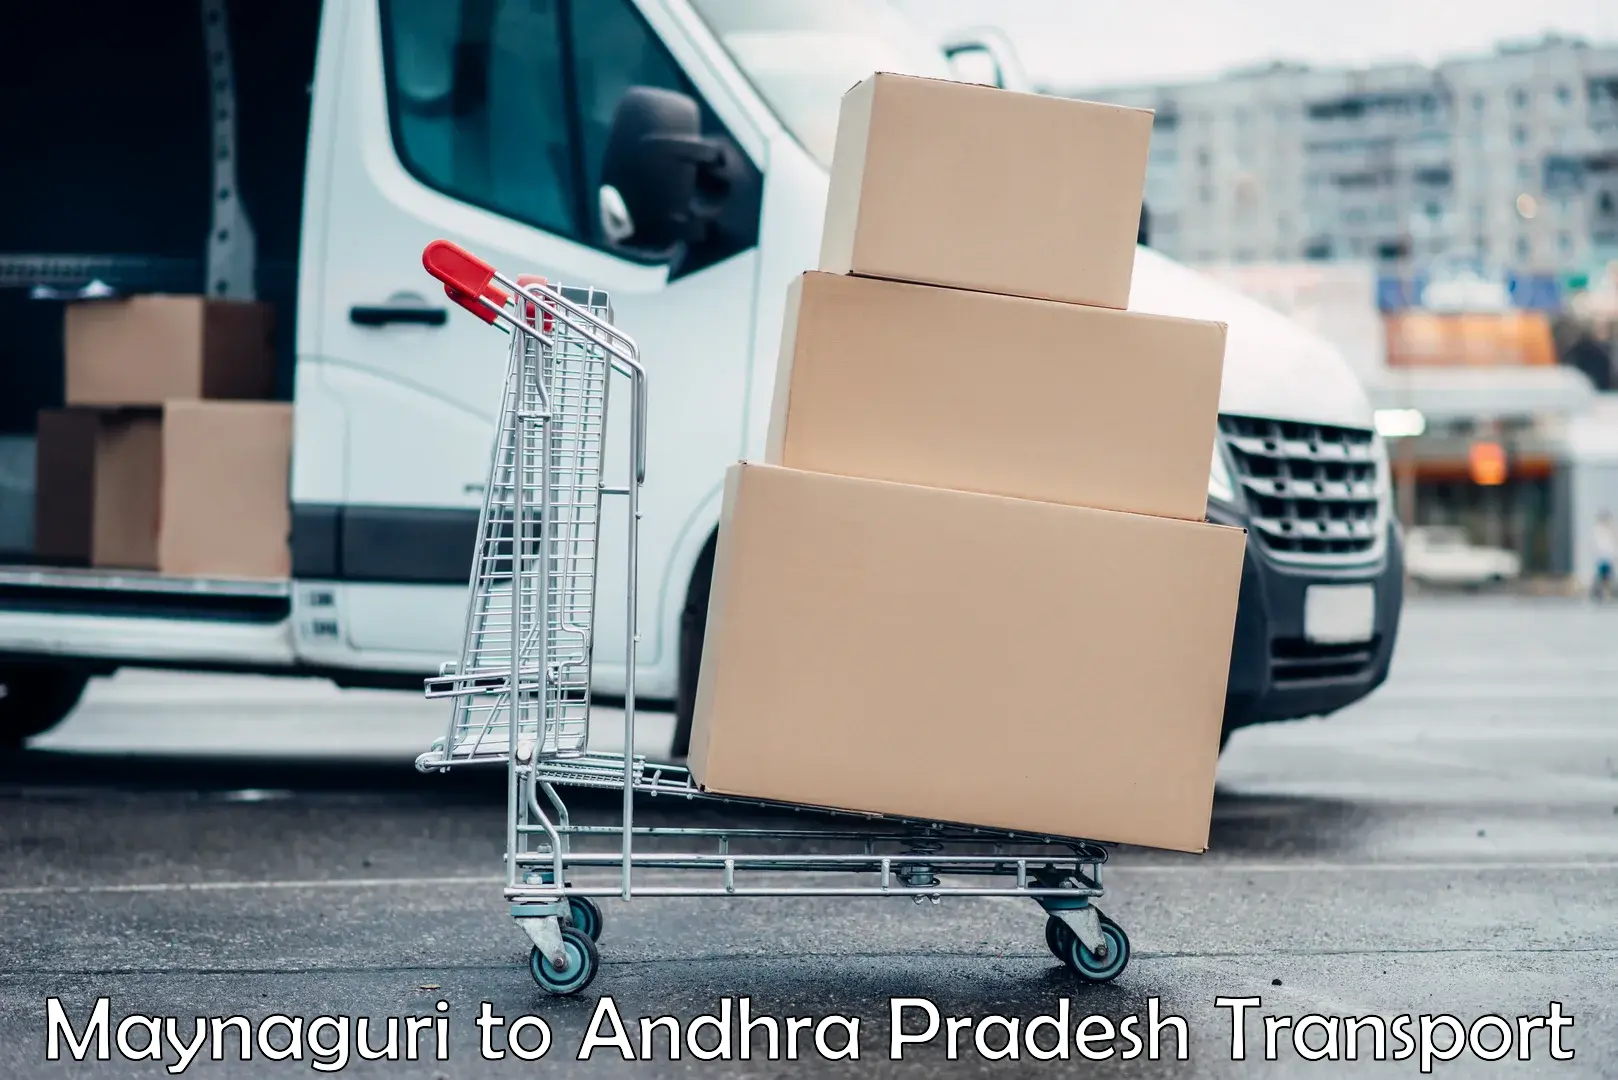 Truck transport companies in India Maynaguri to Srisailam